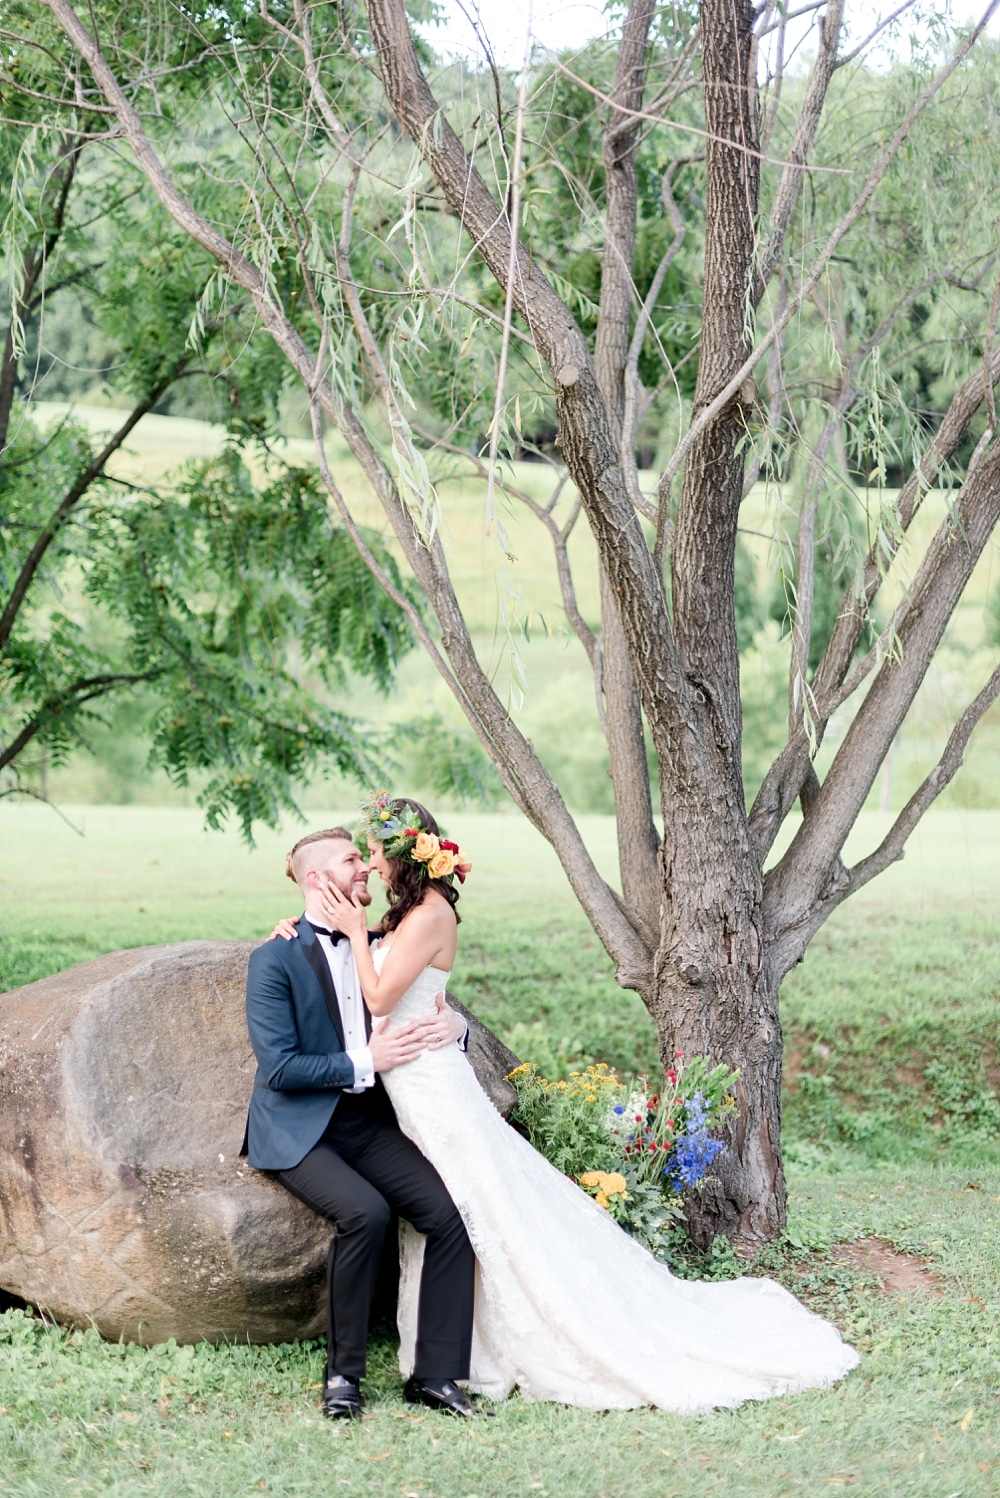 Bride and groom by weeping willow tree at DelFosse Winery in VA